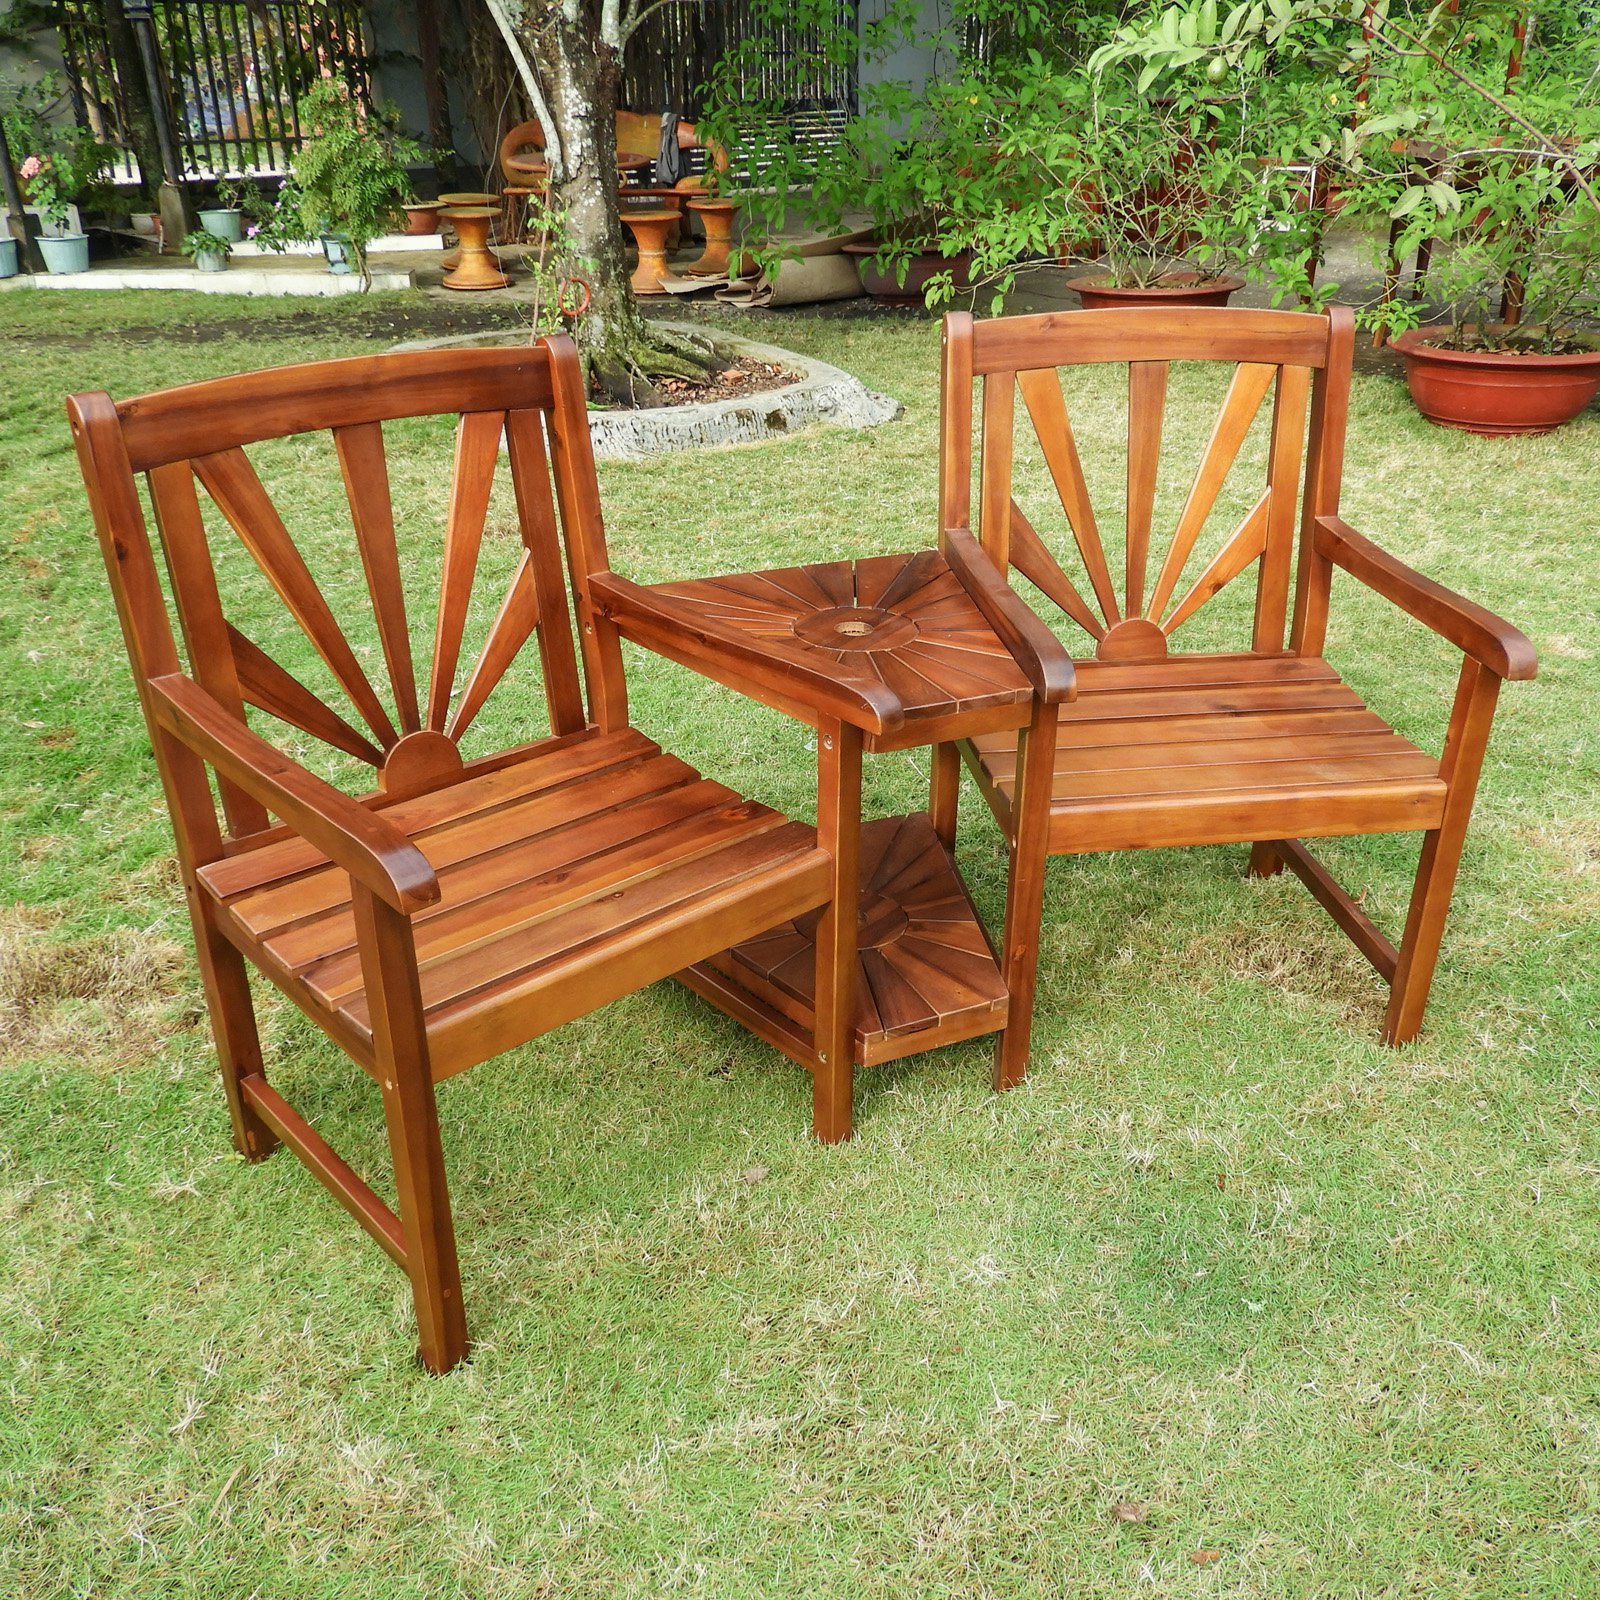 International Caravan Sapporo Highland Acacia 2 Seater Outdoor Lounge Chair Set with Table - image 1 of 2